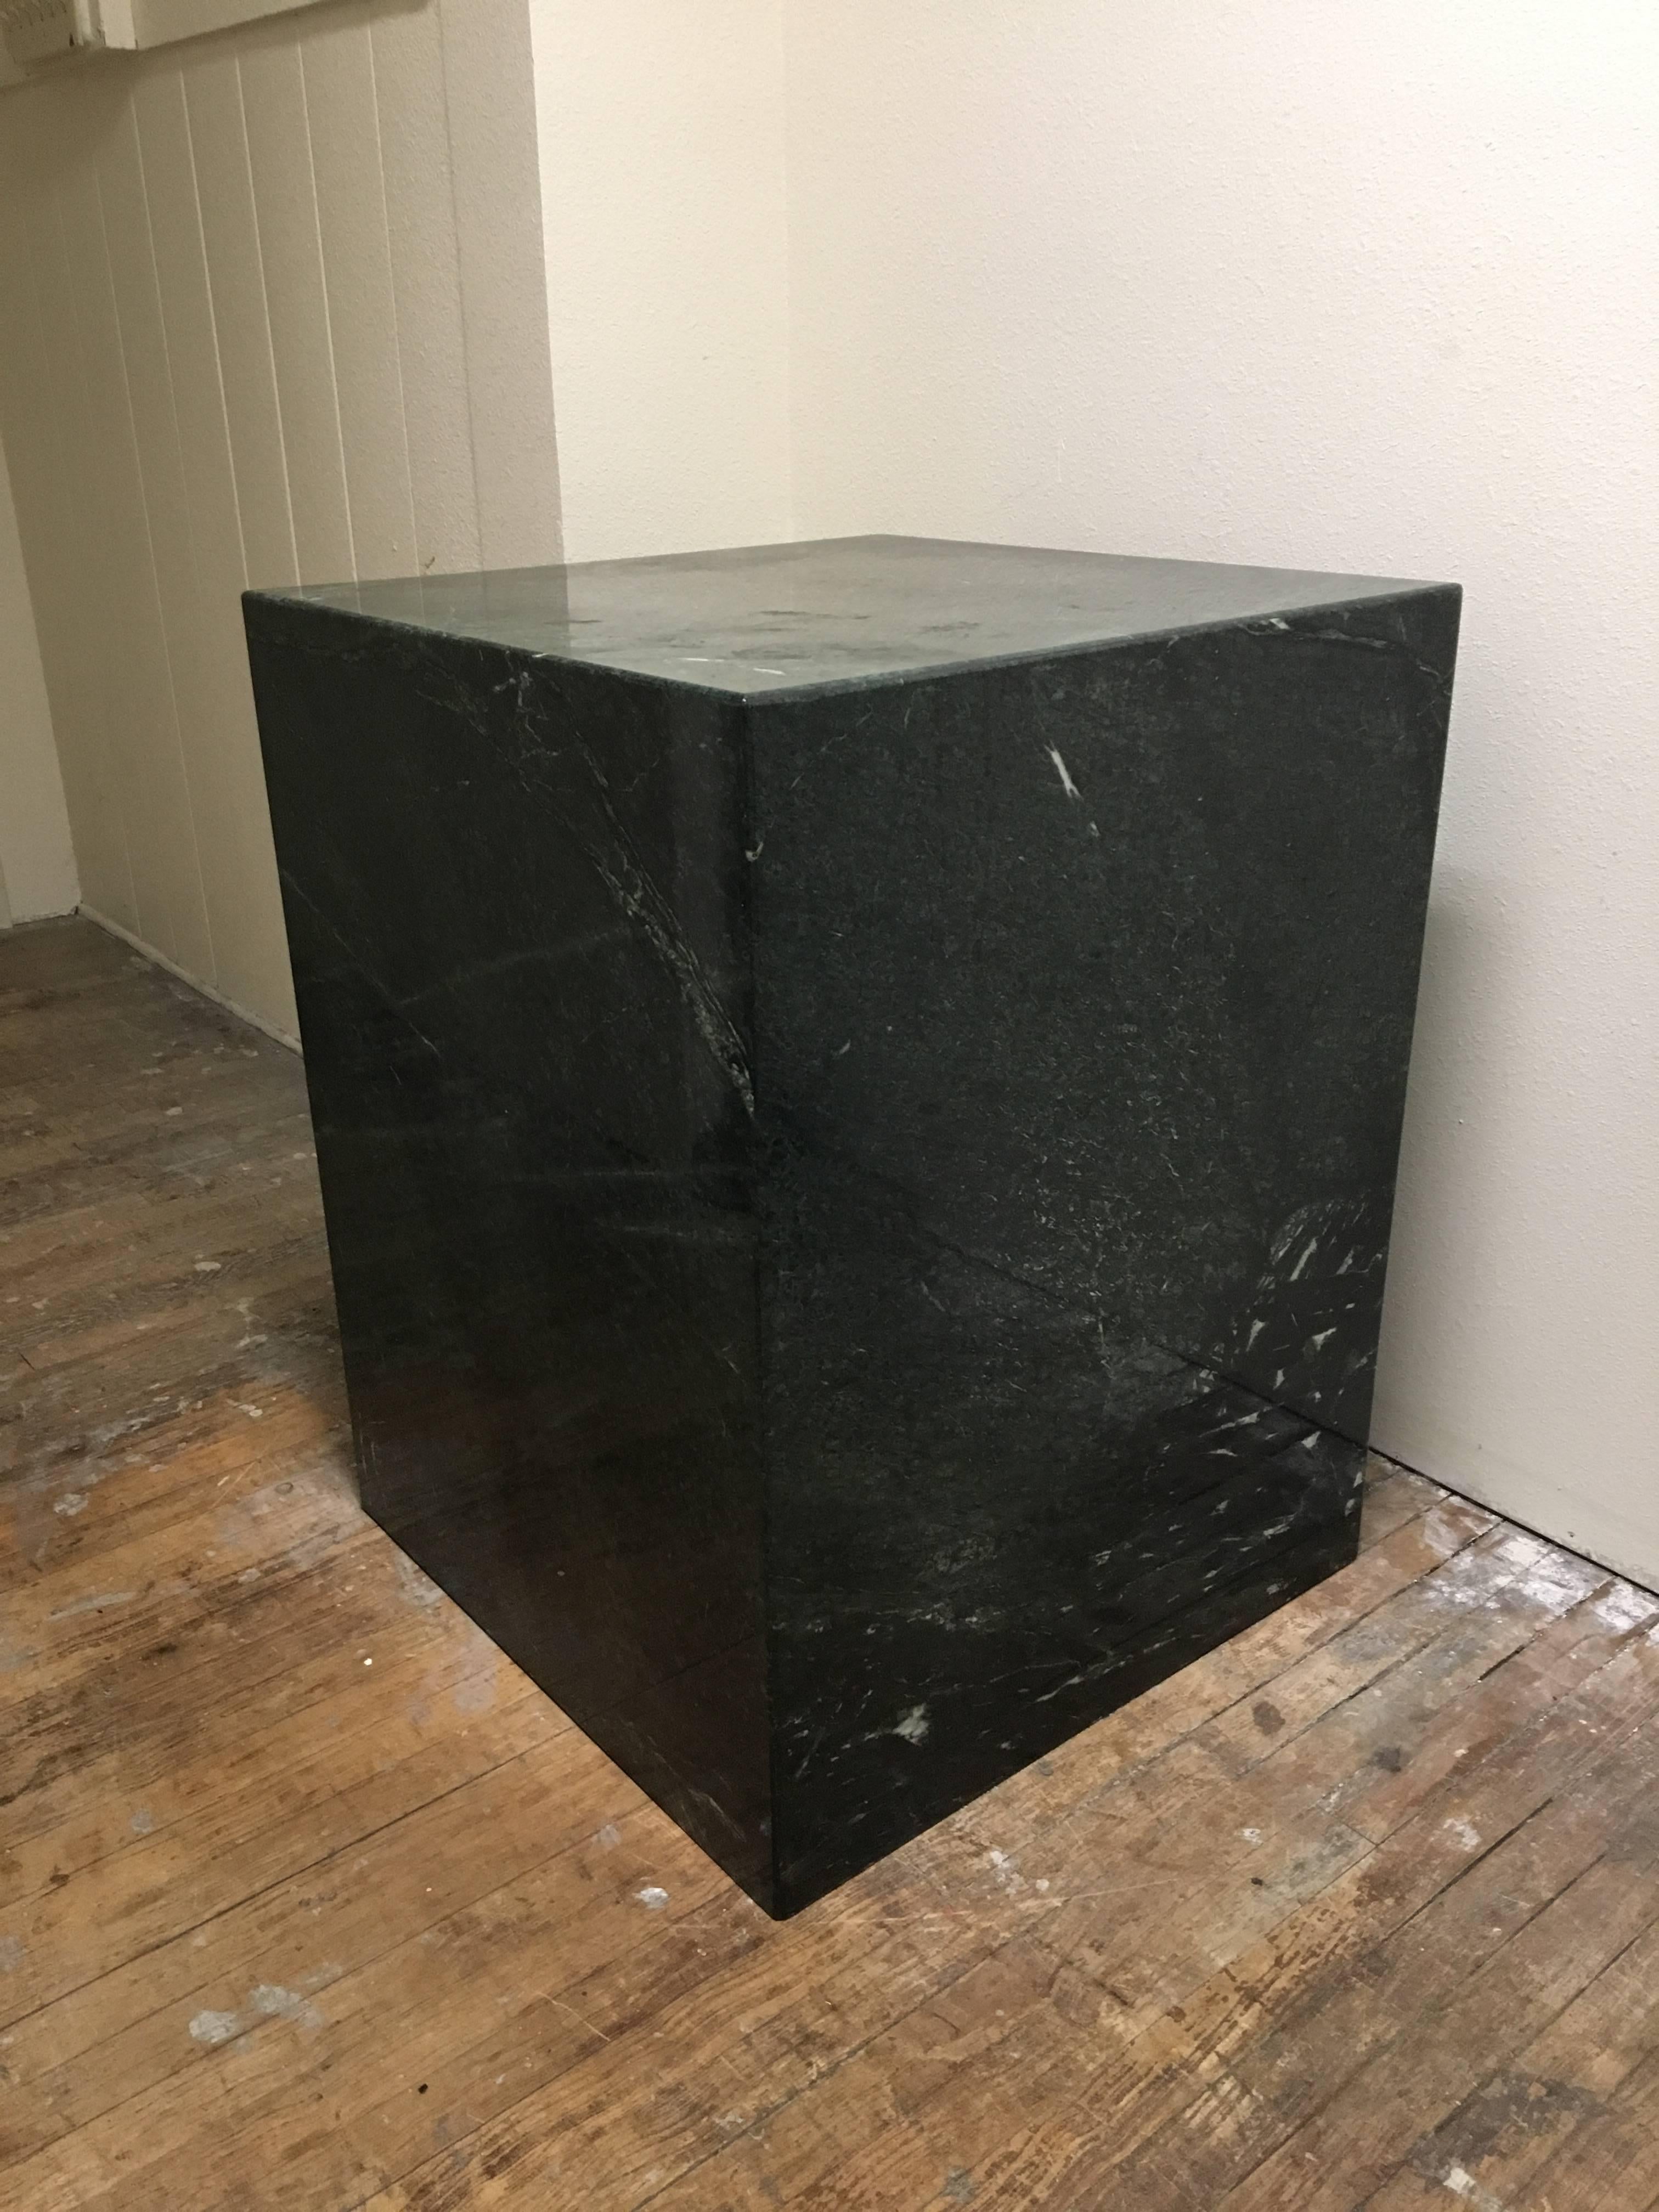 Extra large (28" x 28" x 36") green malachite marble pedestal. Great for displaying a bronze sculpture or a piece of art glass.